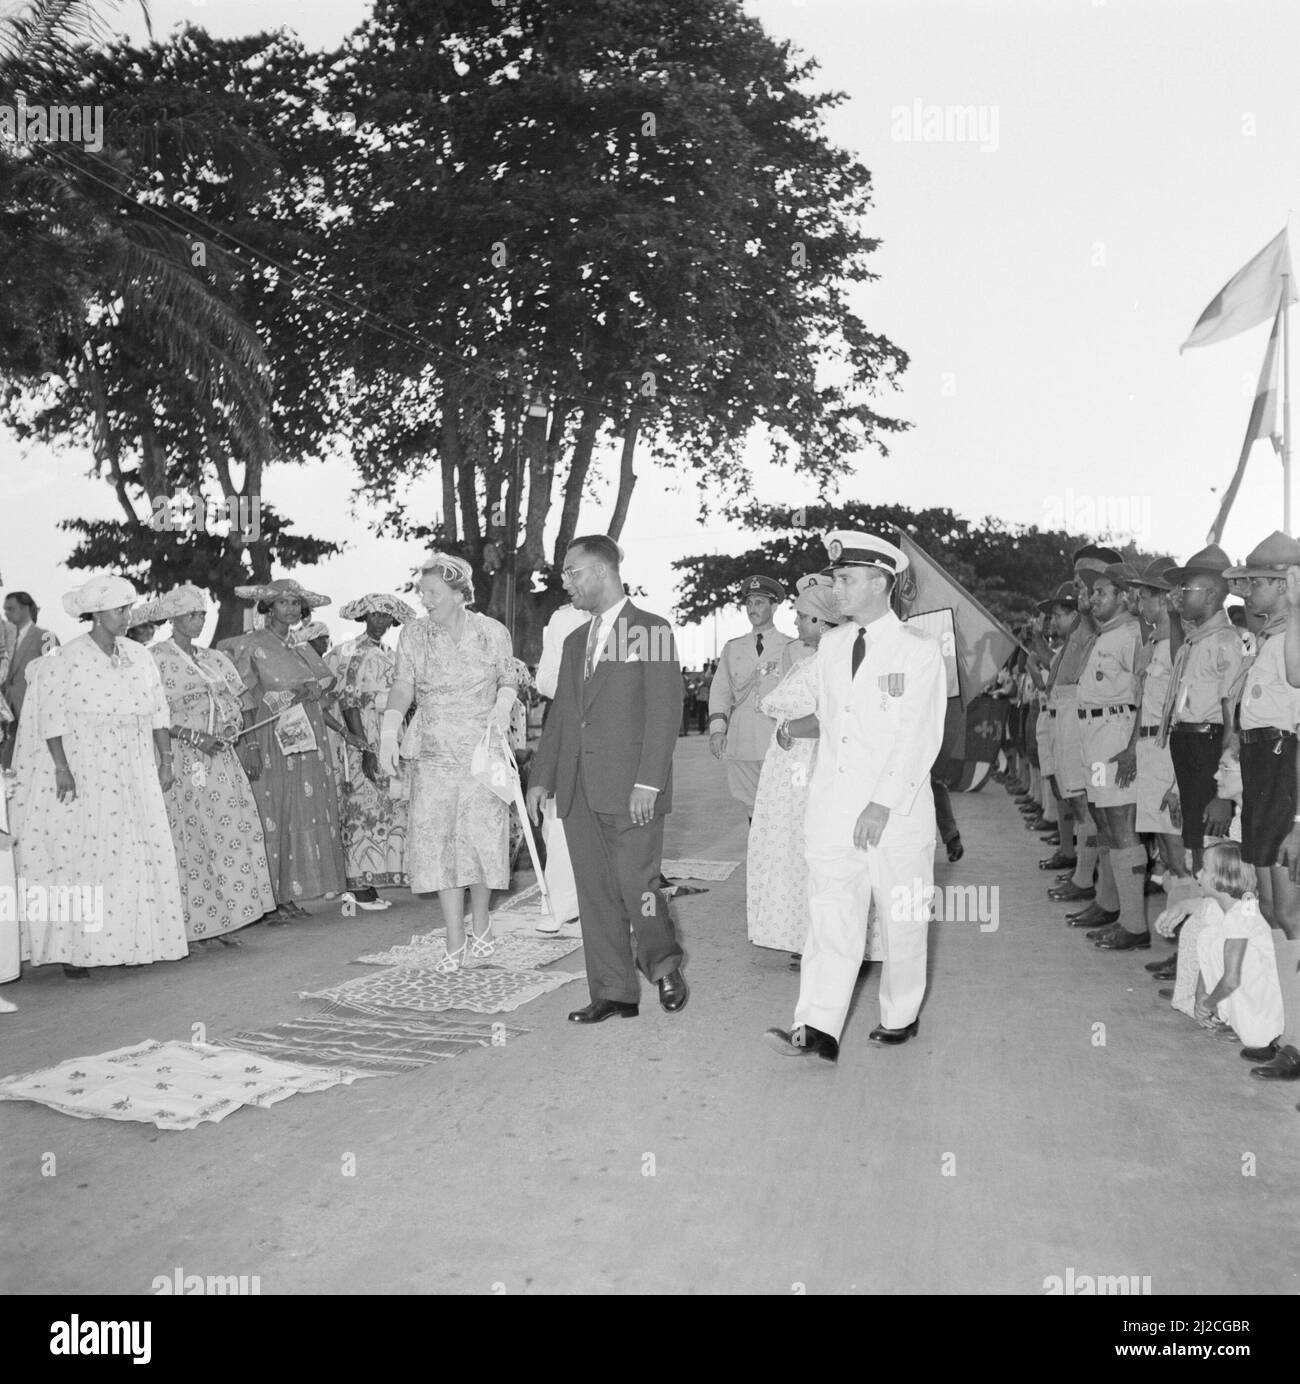 Queen and Prince walk through Dumburg. Right Governor Klaasesz and Johan Ferrier, President of the Council of Ministers ca: October 27, 1955 Stock Photo